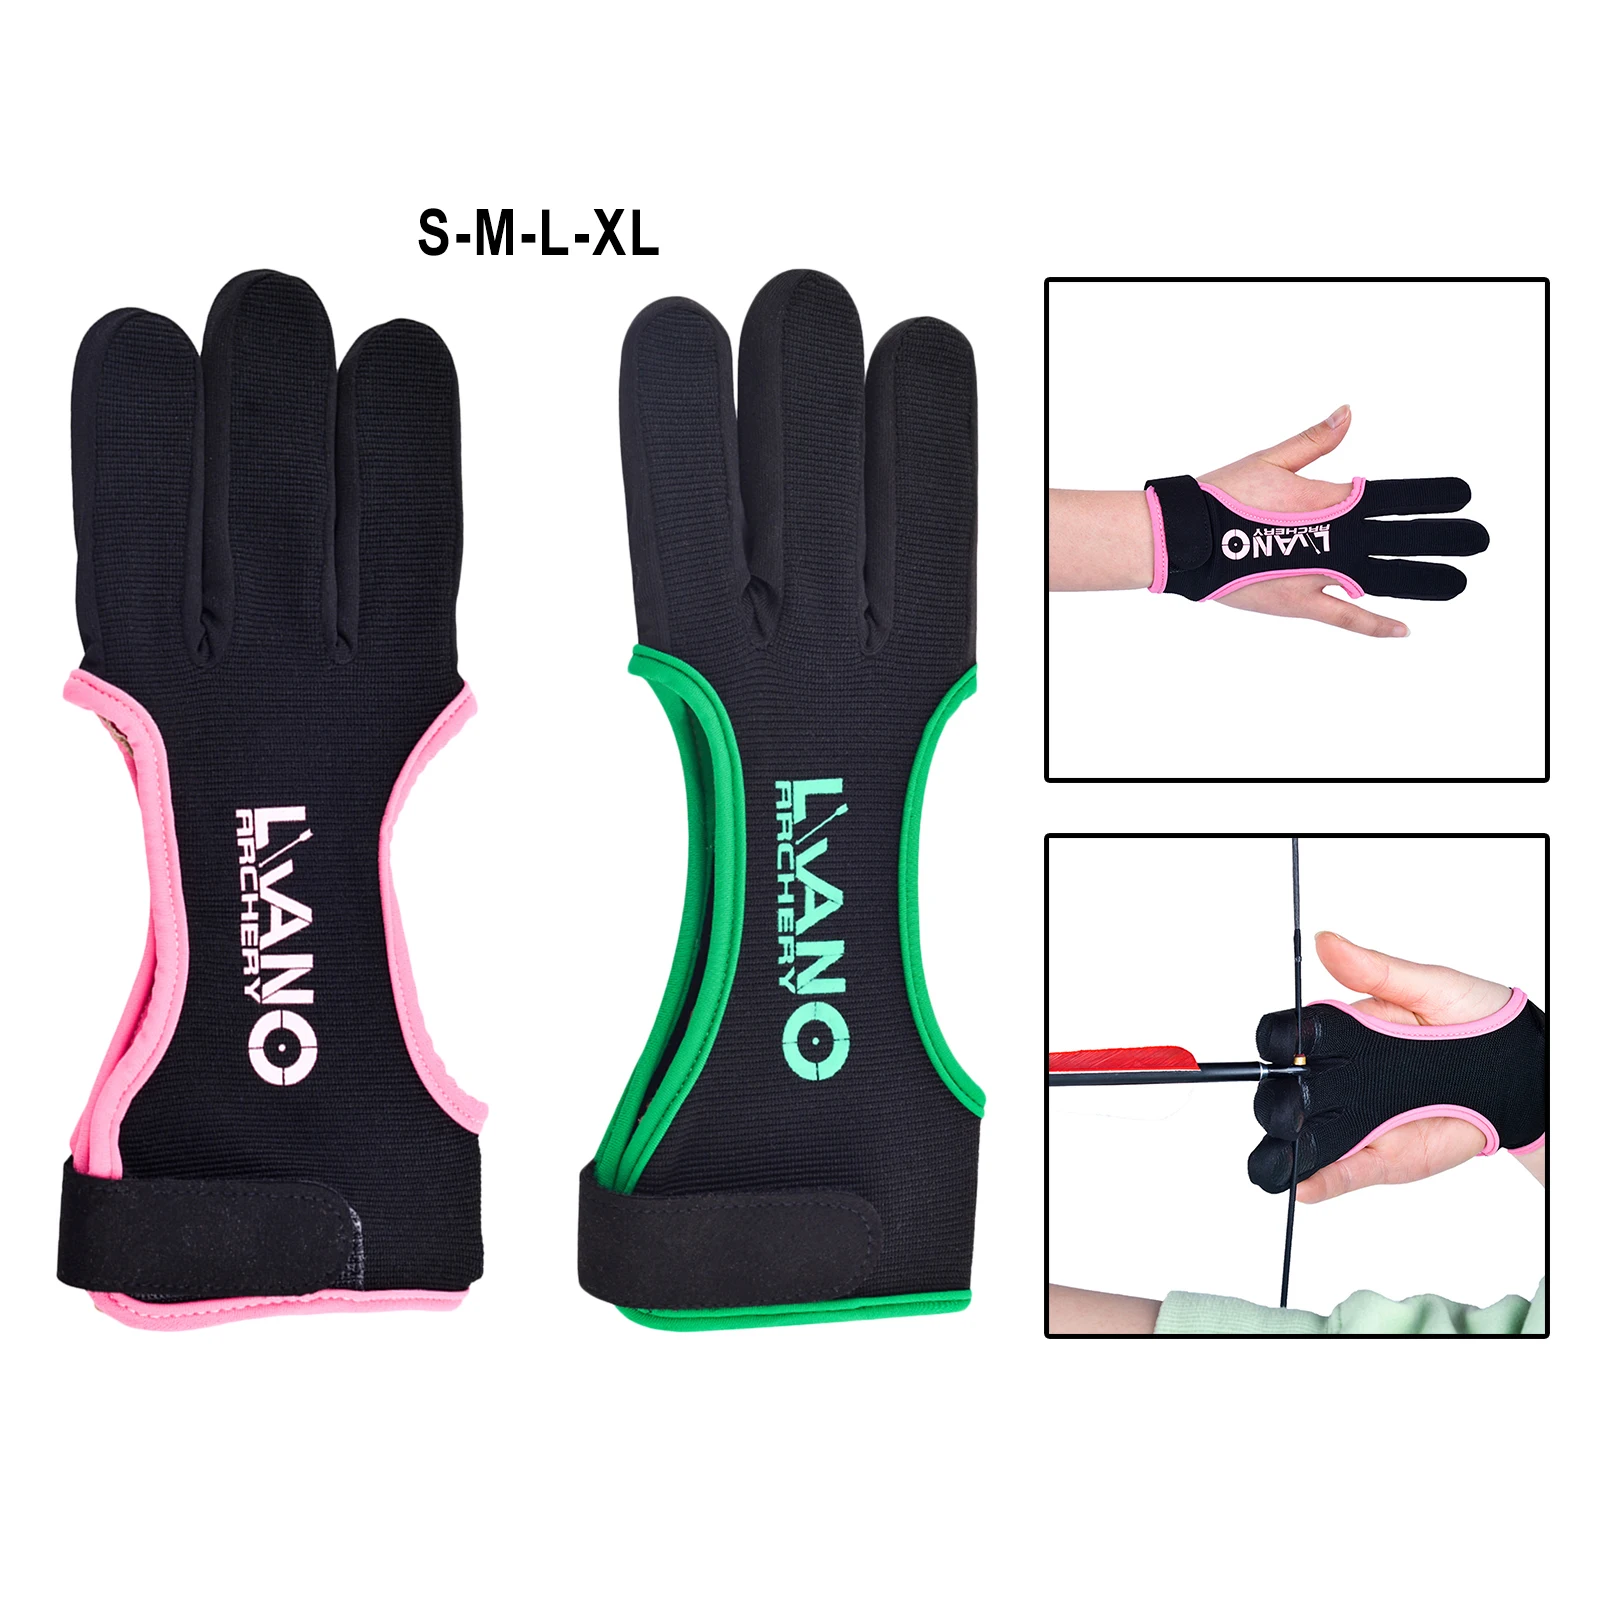 Protective 3 Fingers Hand Leather Guard Glove Safety Archery Leather Glove for Recurve Compound Bow Shooting Hunting